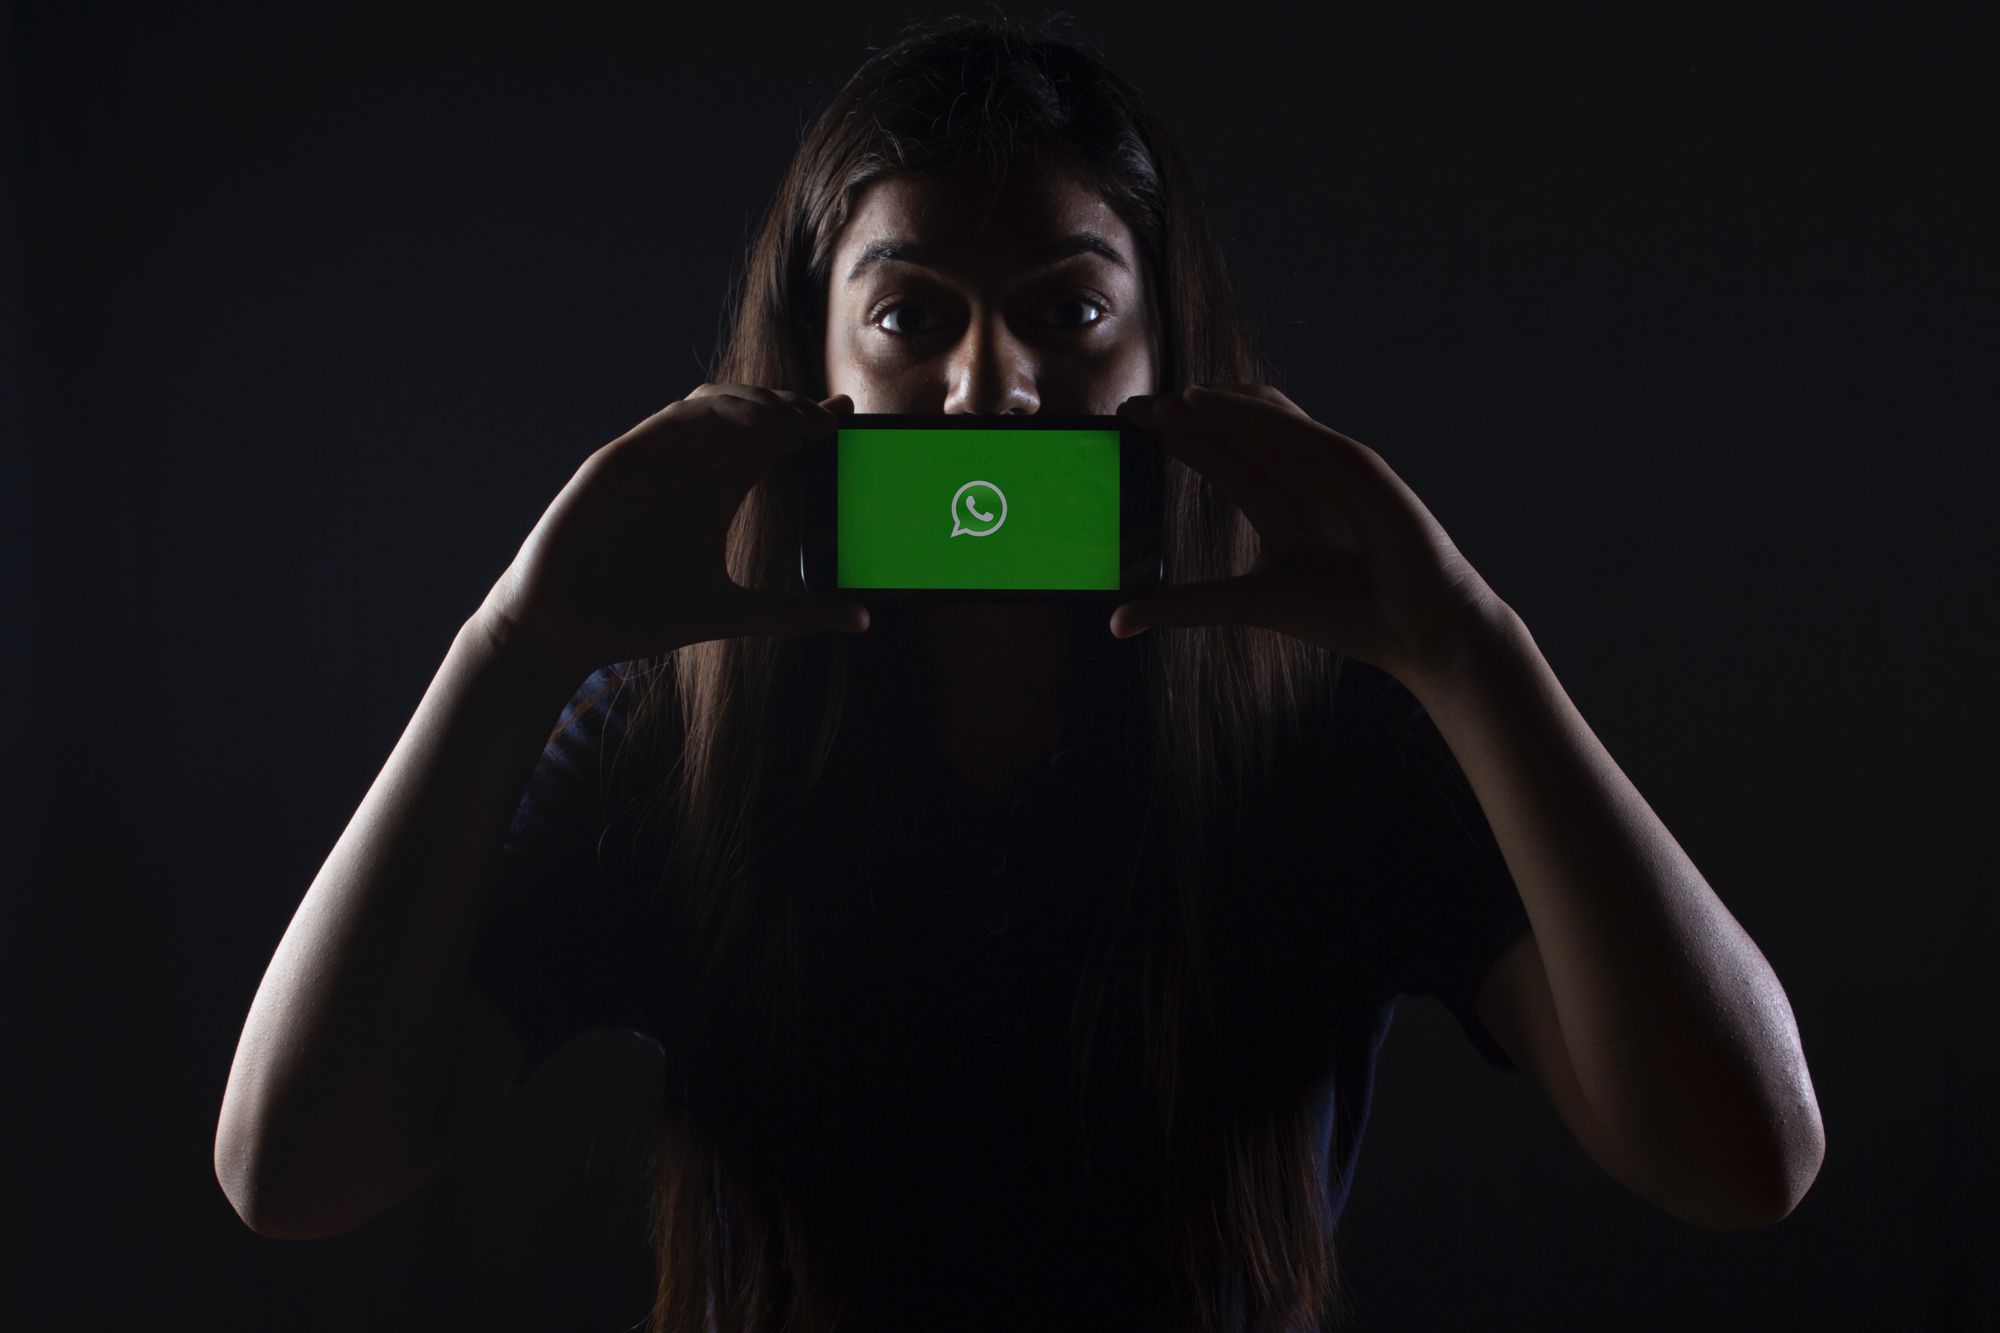 How to send WhatsApp message without showing your number